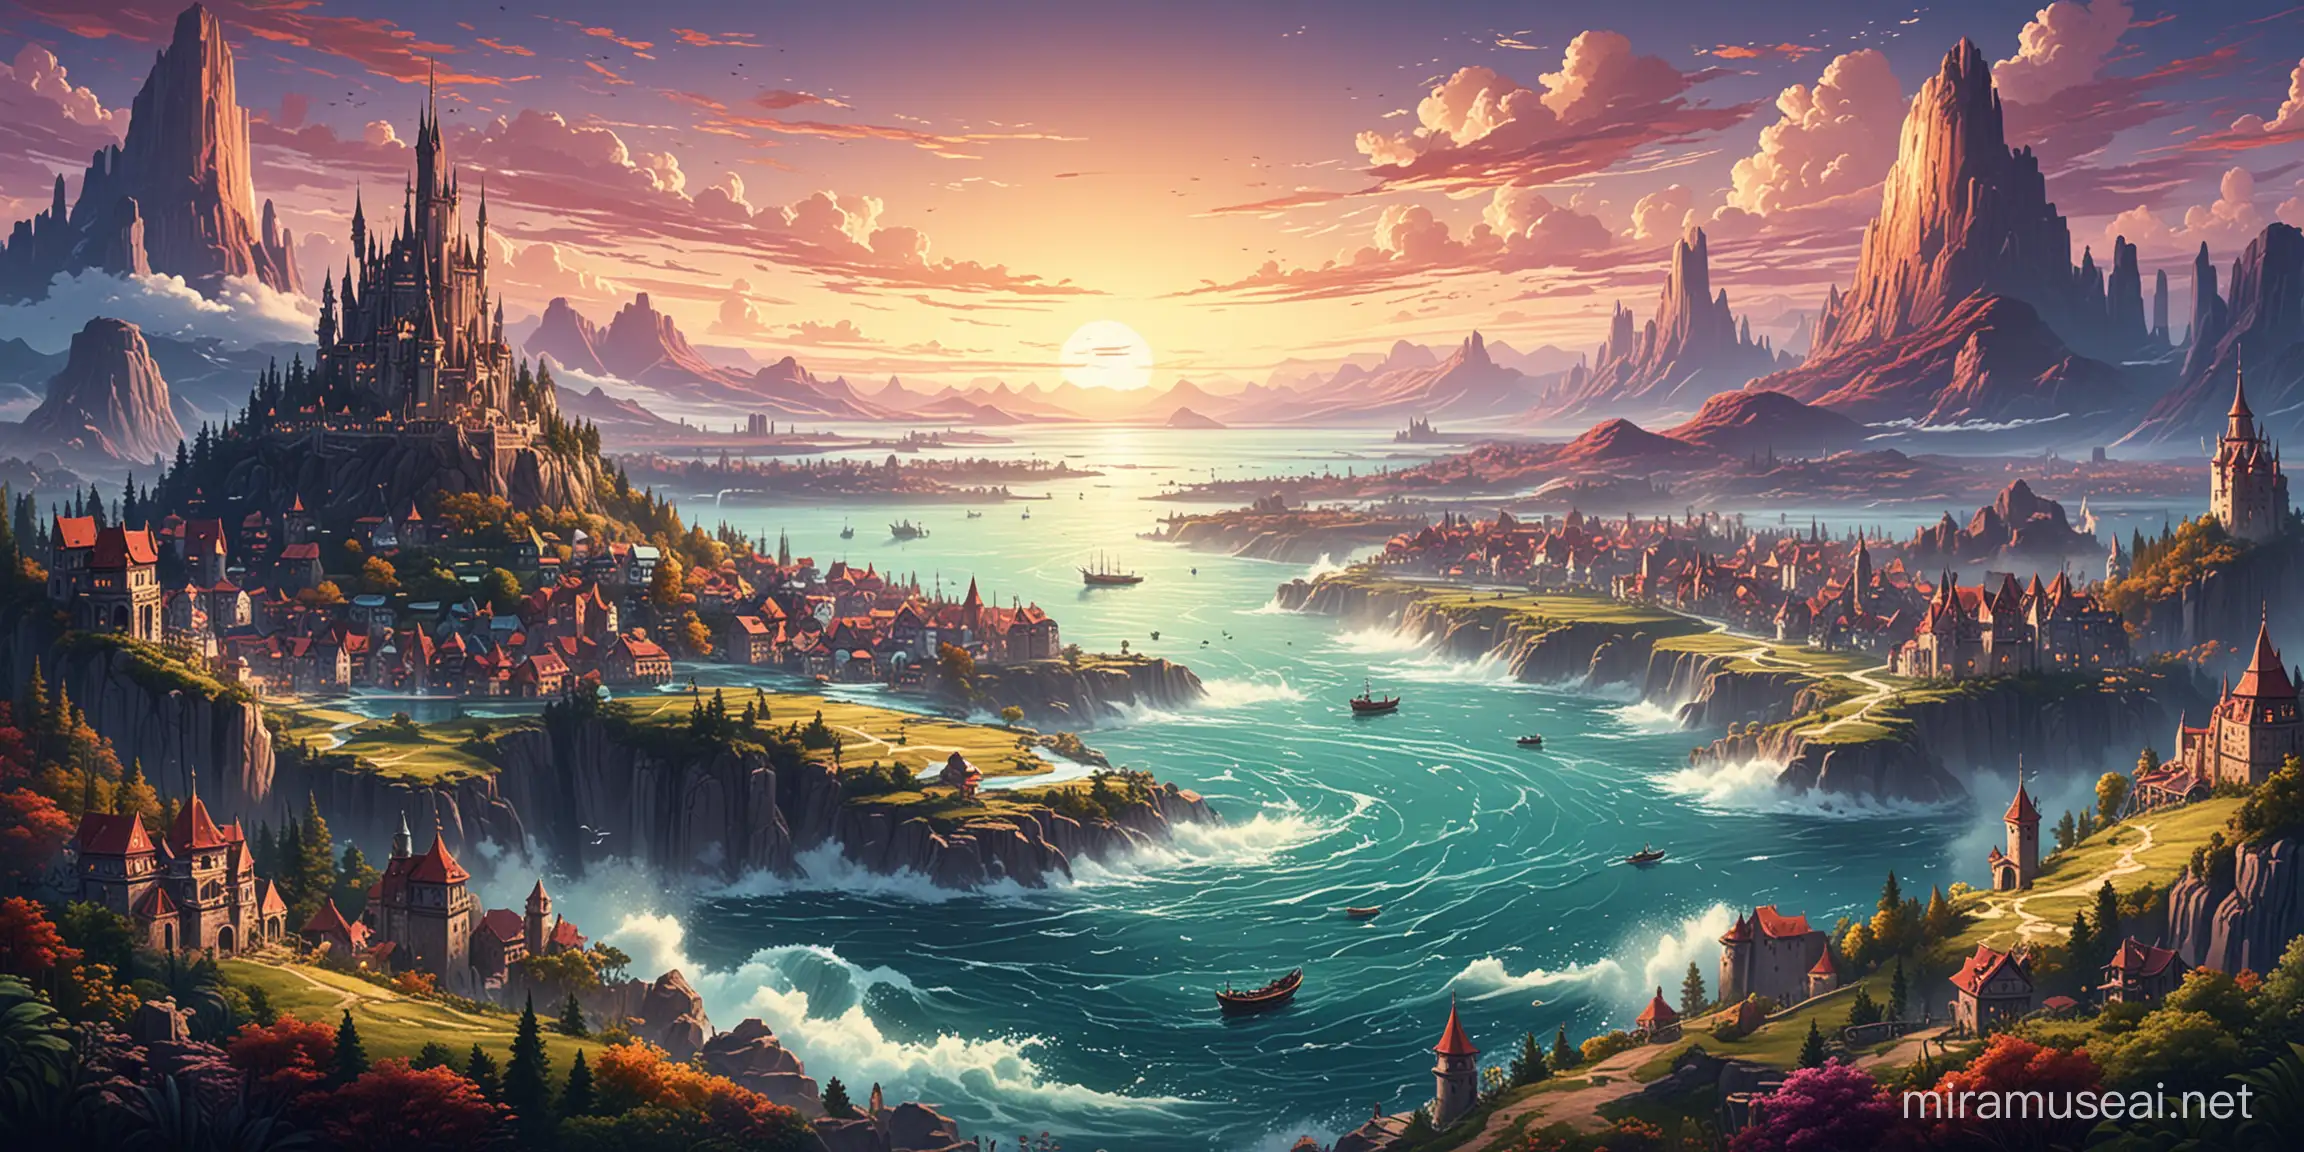 Fantasy Land with Distant City on a Big River Flowing into an Ocean